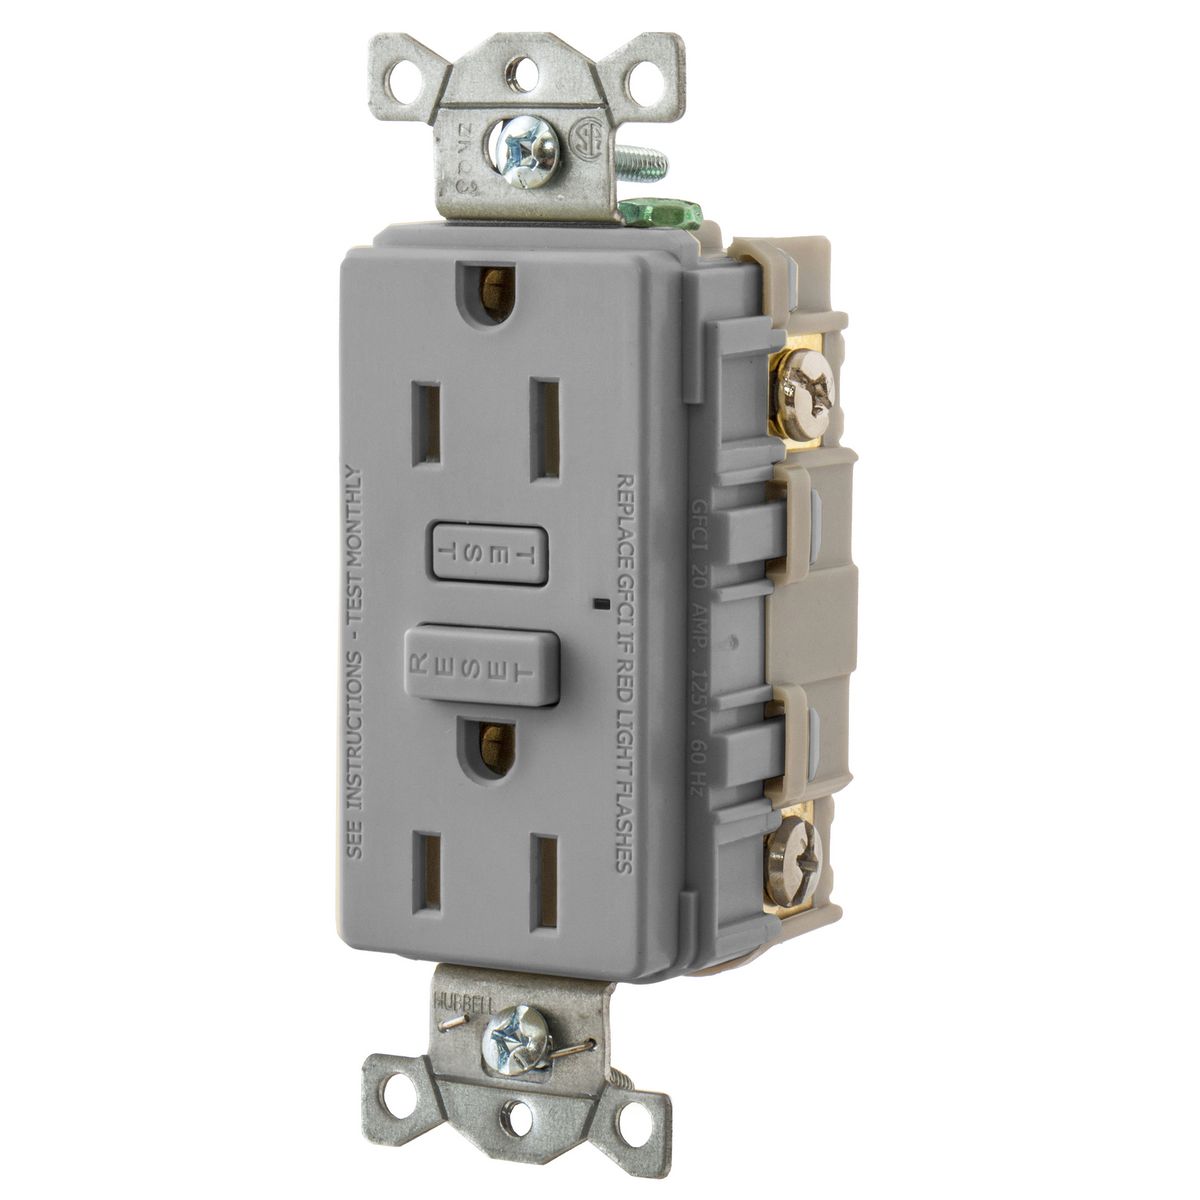 Hubbell Wiring Device Kellems, Power Protection Products, GFCIReceptacle, Duplex, Hubbell PRO, 15A 125V AC, 2-Pole 3-Wire Grounding,5-15R, Gray